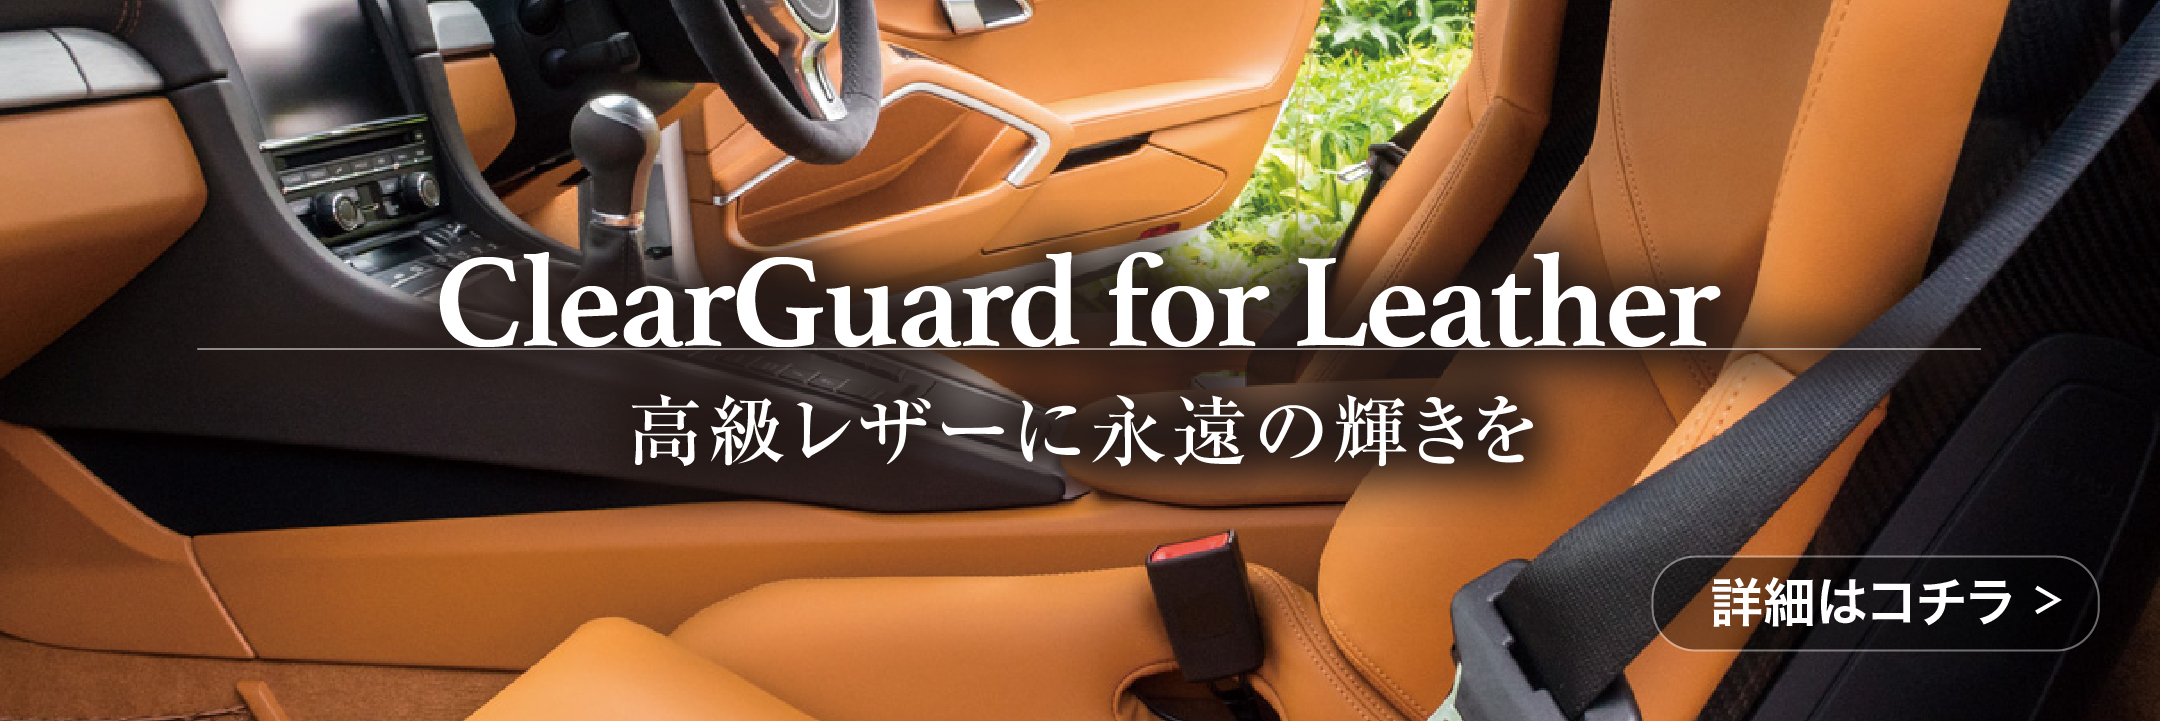 Clearguard for Leatherクリアガードフォーレザー